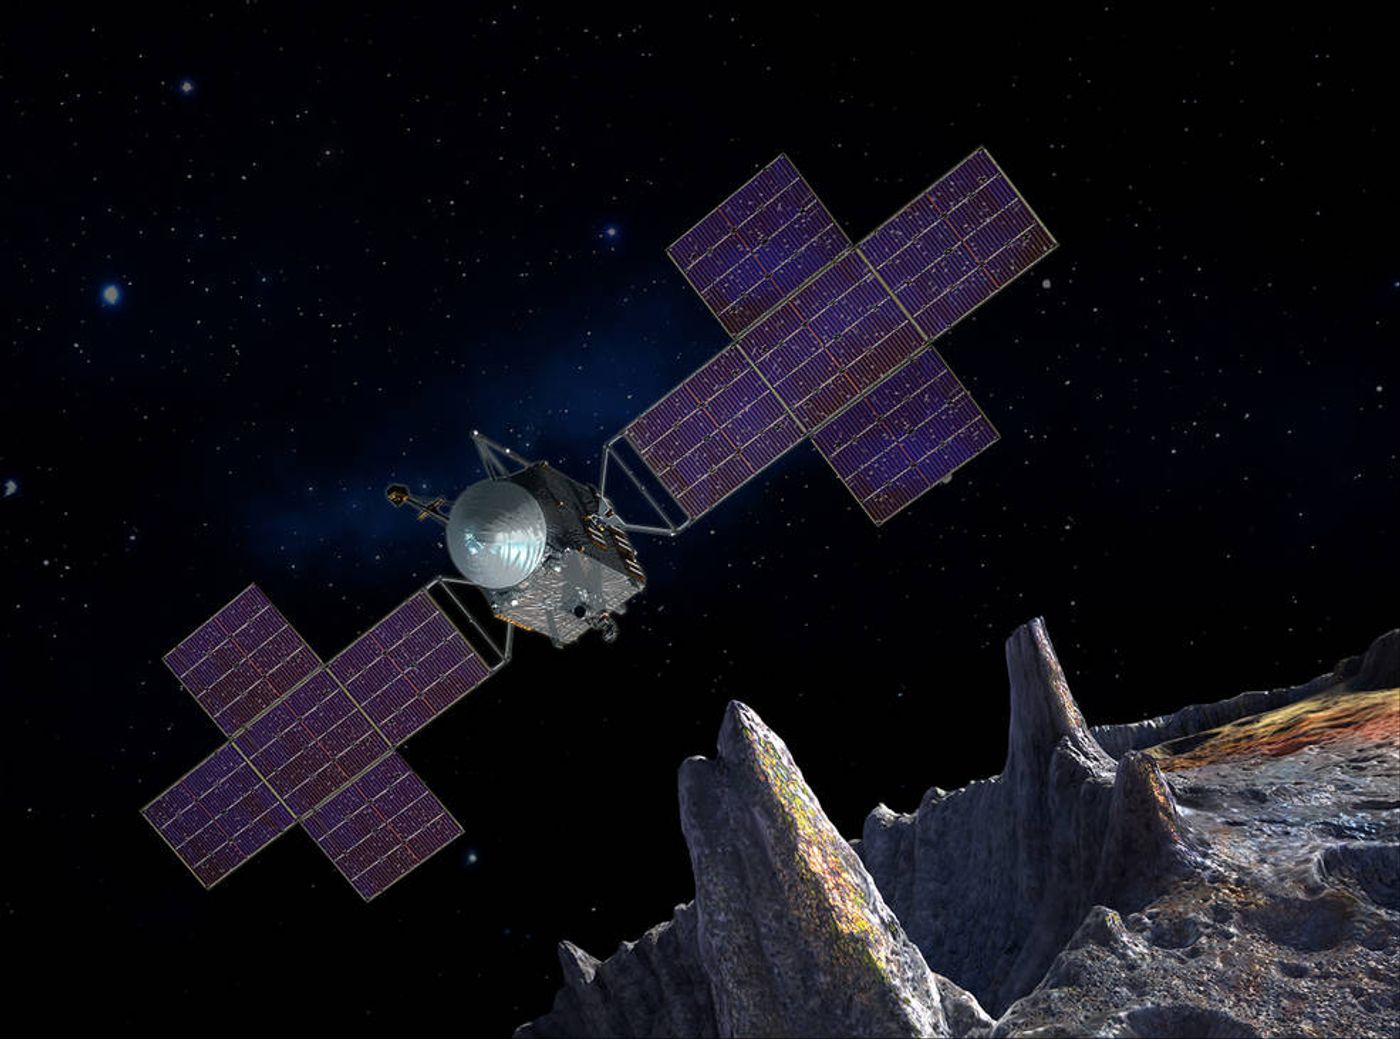 An artist's impression of Psyche and the spacecraft that will visit it.